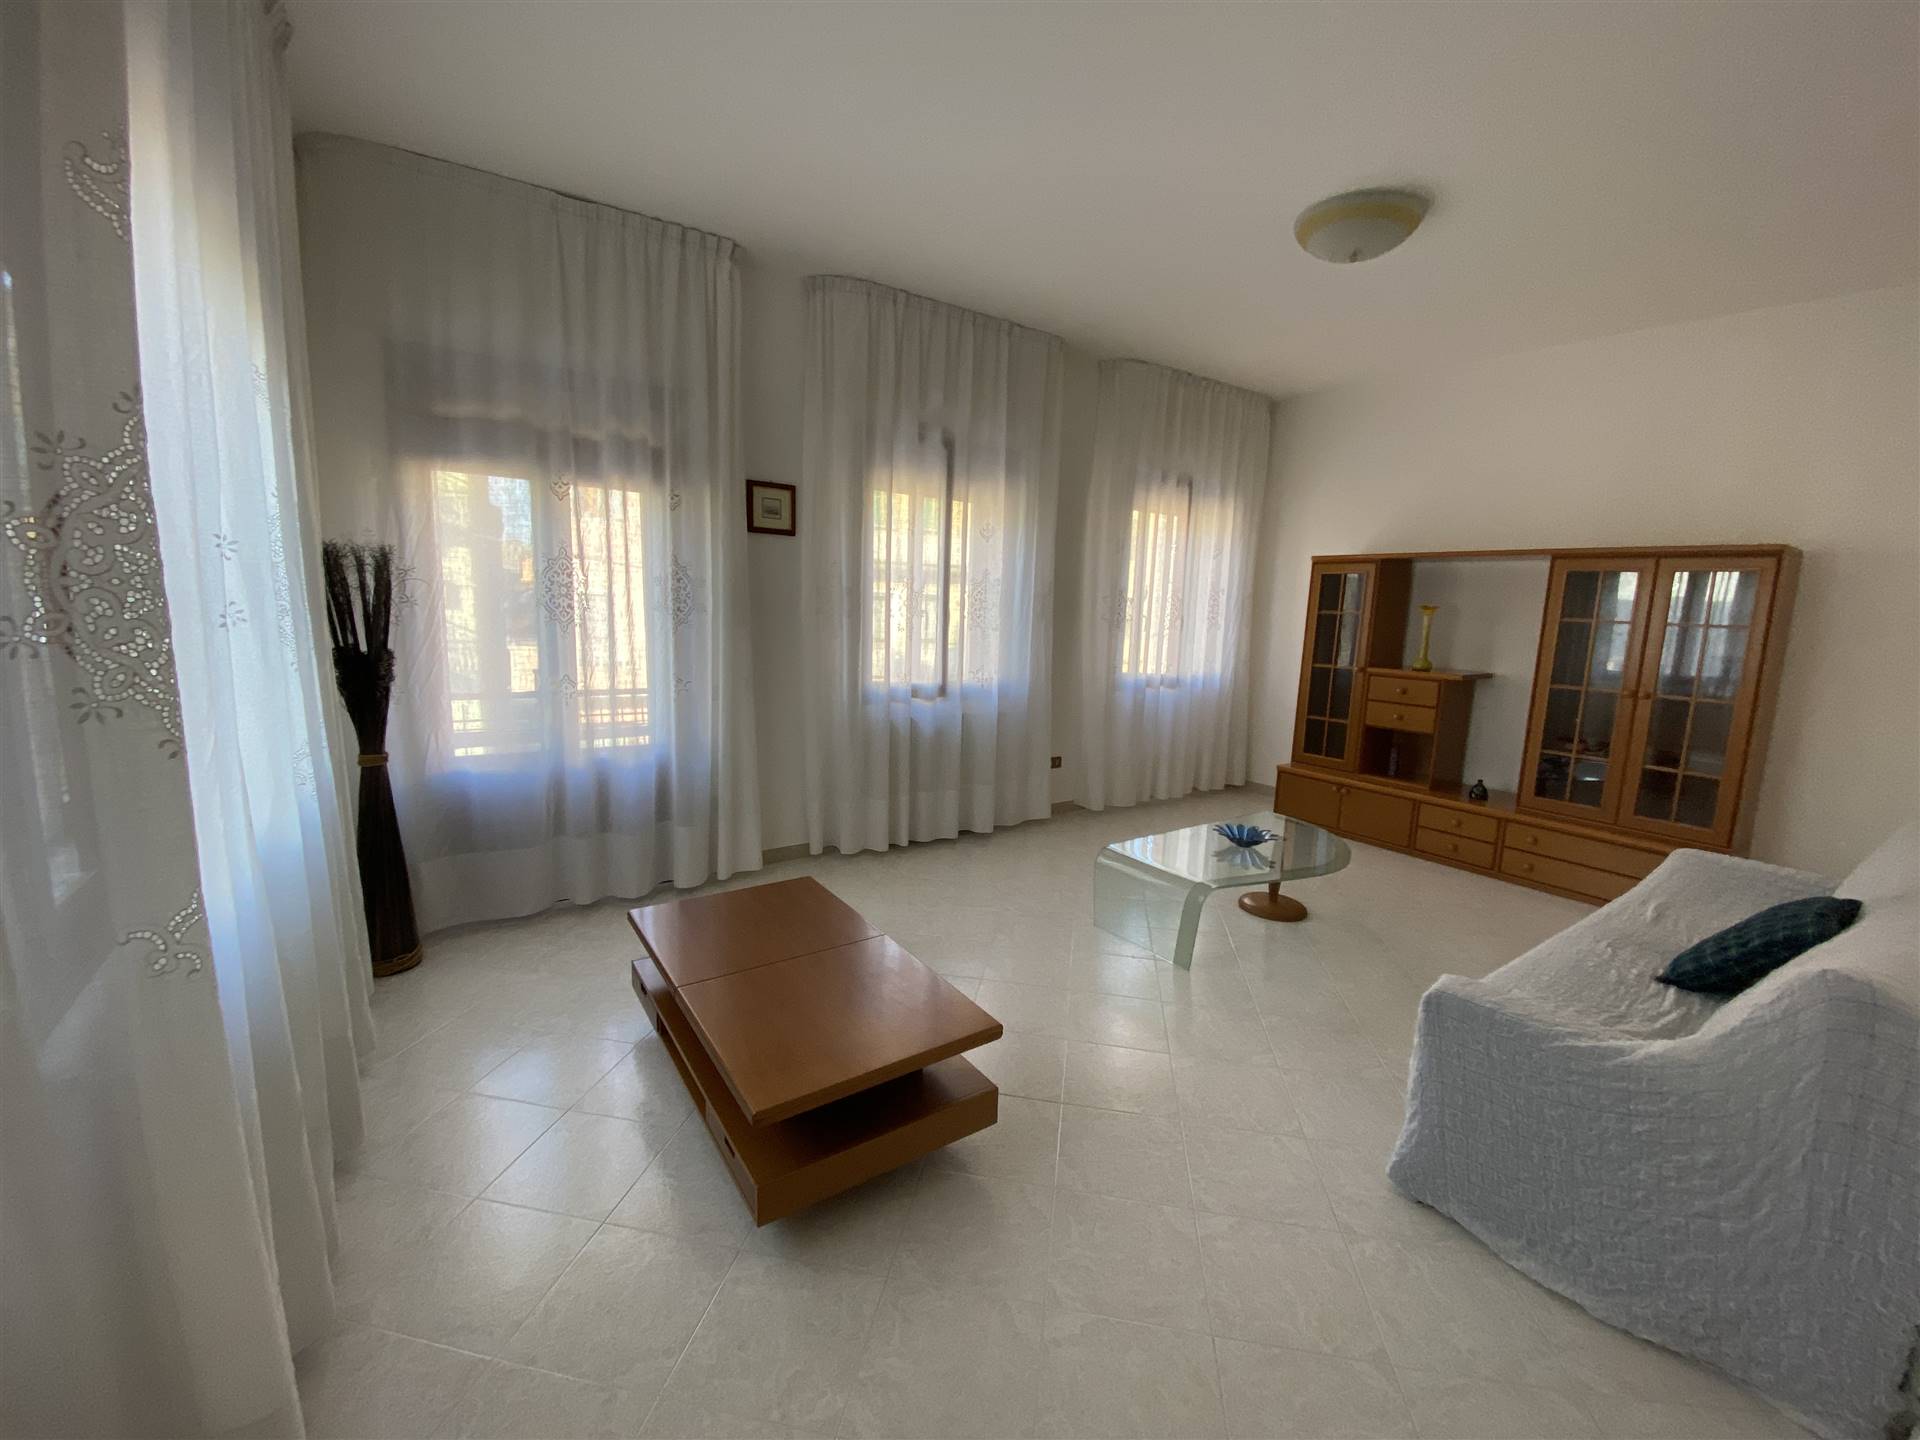 SOTTOMARINA, CHIOGGIA, Apartment for sale, Habitable, Heating Individual heating system, Energetic class: G, placed at 1° on 1, composed by: 5 Rooms, 